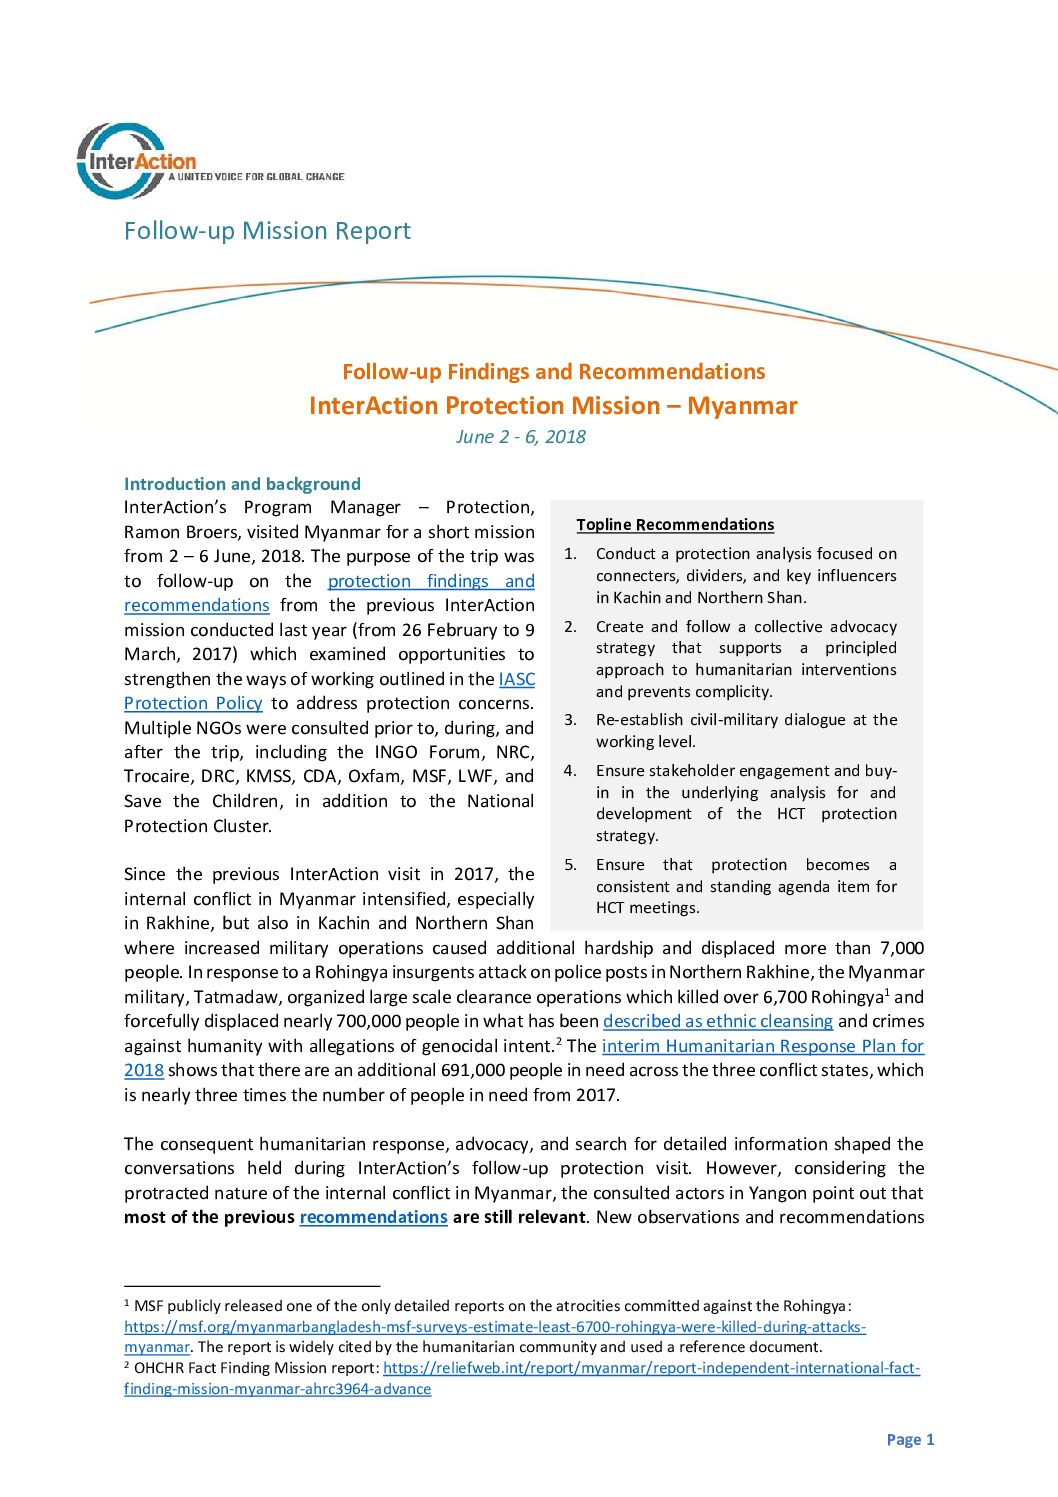 Photo of Follow-up Findings and Recommendations: InterAction Protection Mission – Myanmar